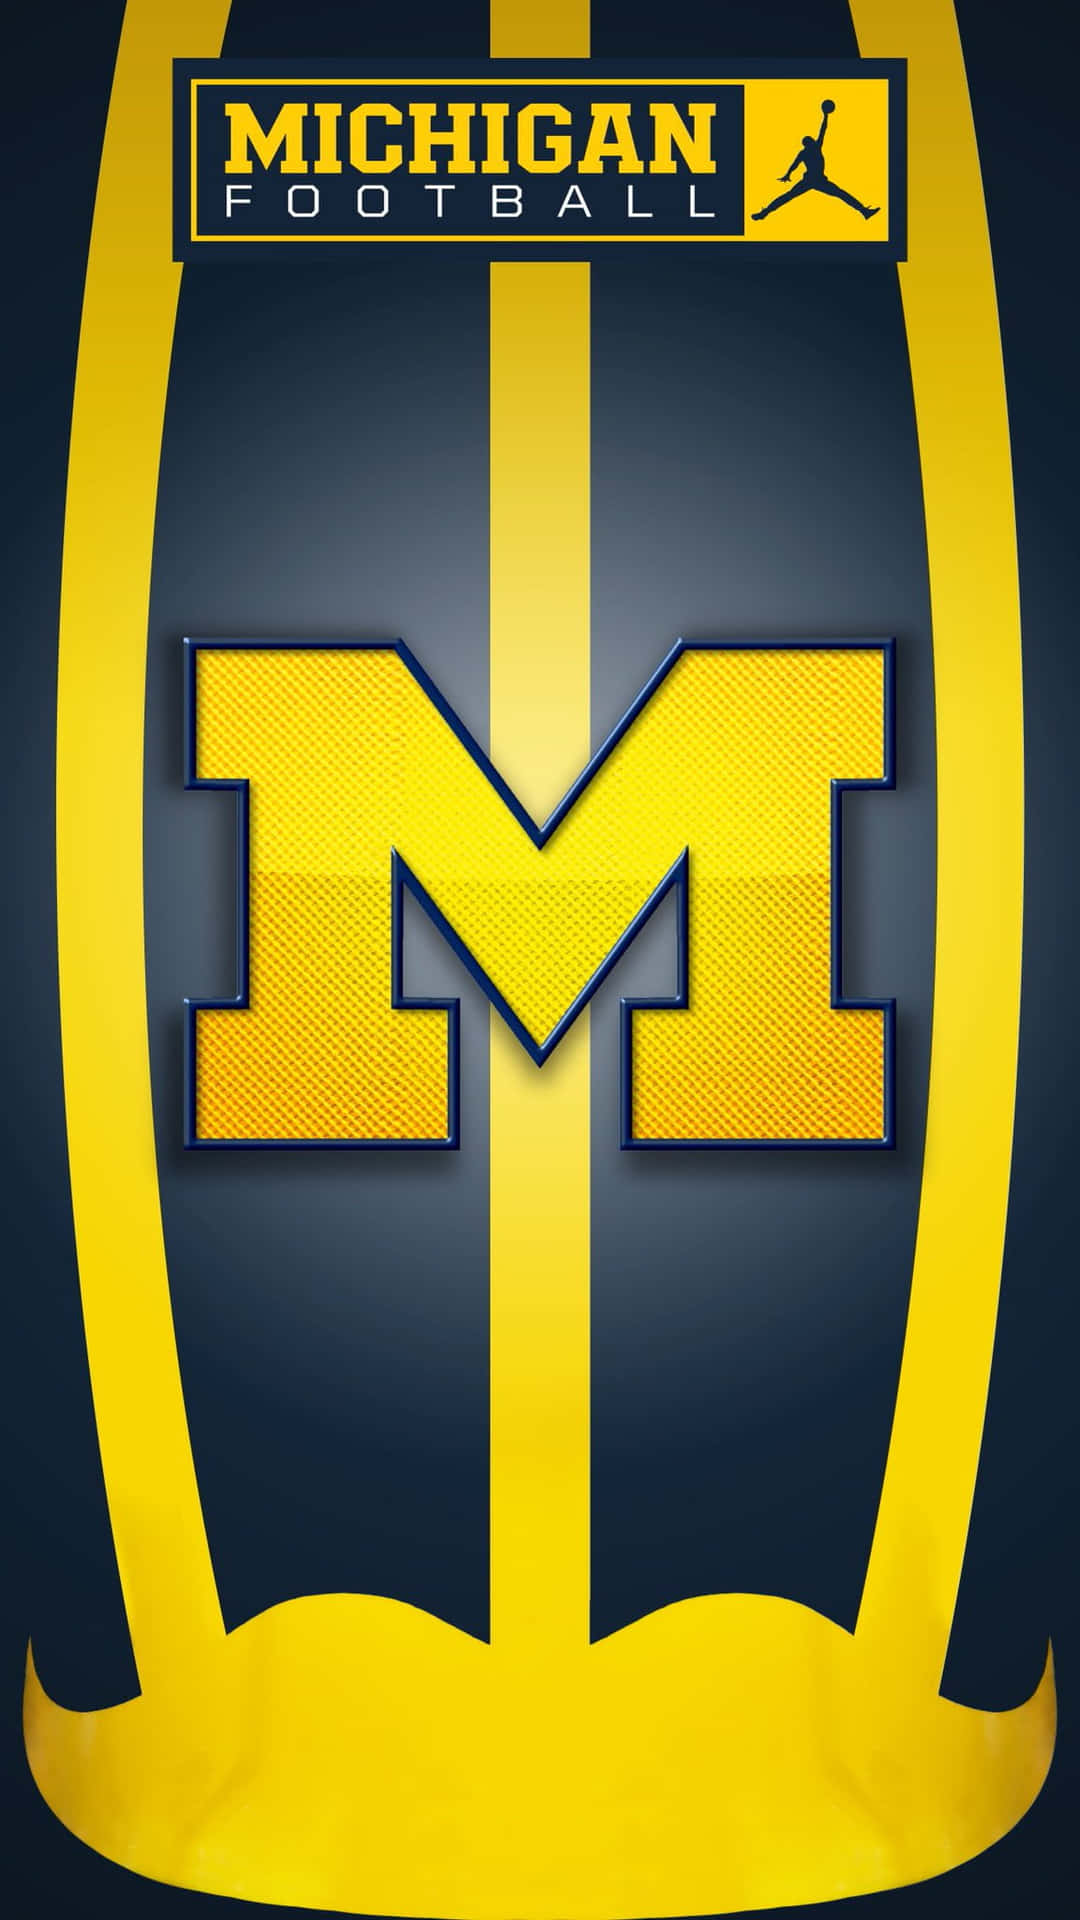 Michigan Wolverines Football Team Charging onto the Field Wallpaper